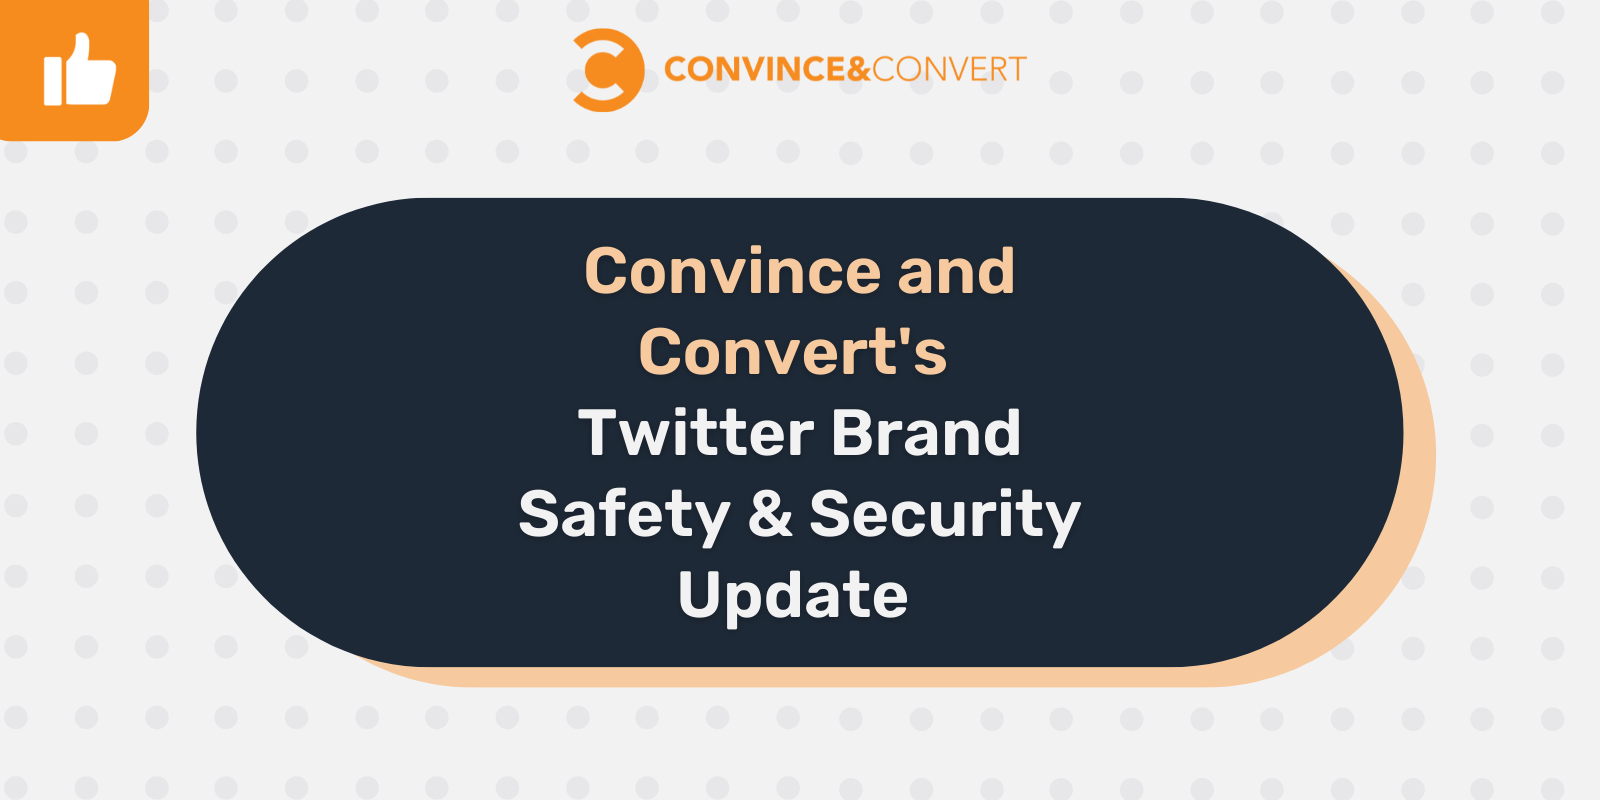 Convince and Convert's Twitter Brand Safety & Security Update 